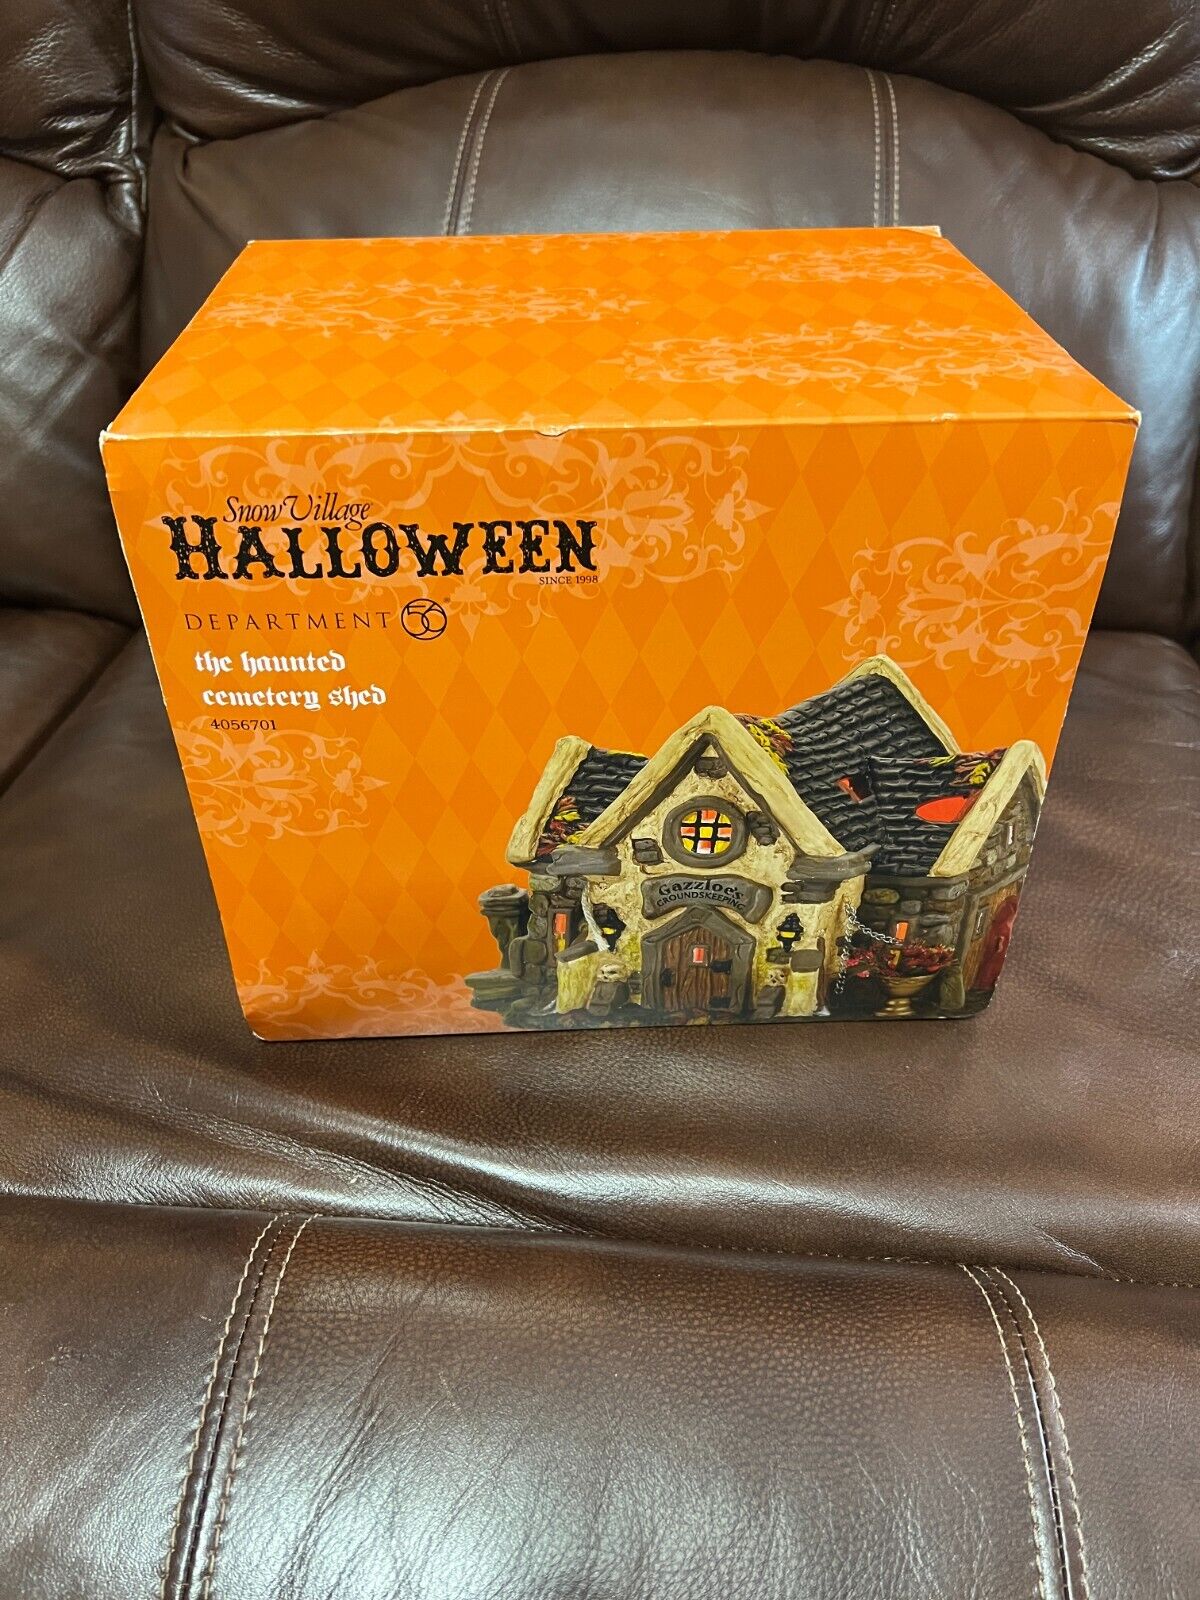 Dept. 56 Halloween, The Haunted Cemetery Shed #4056701 New 